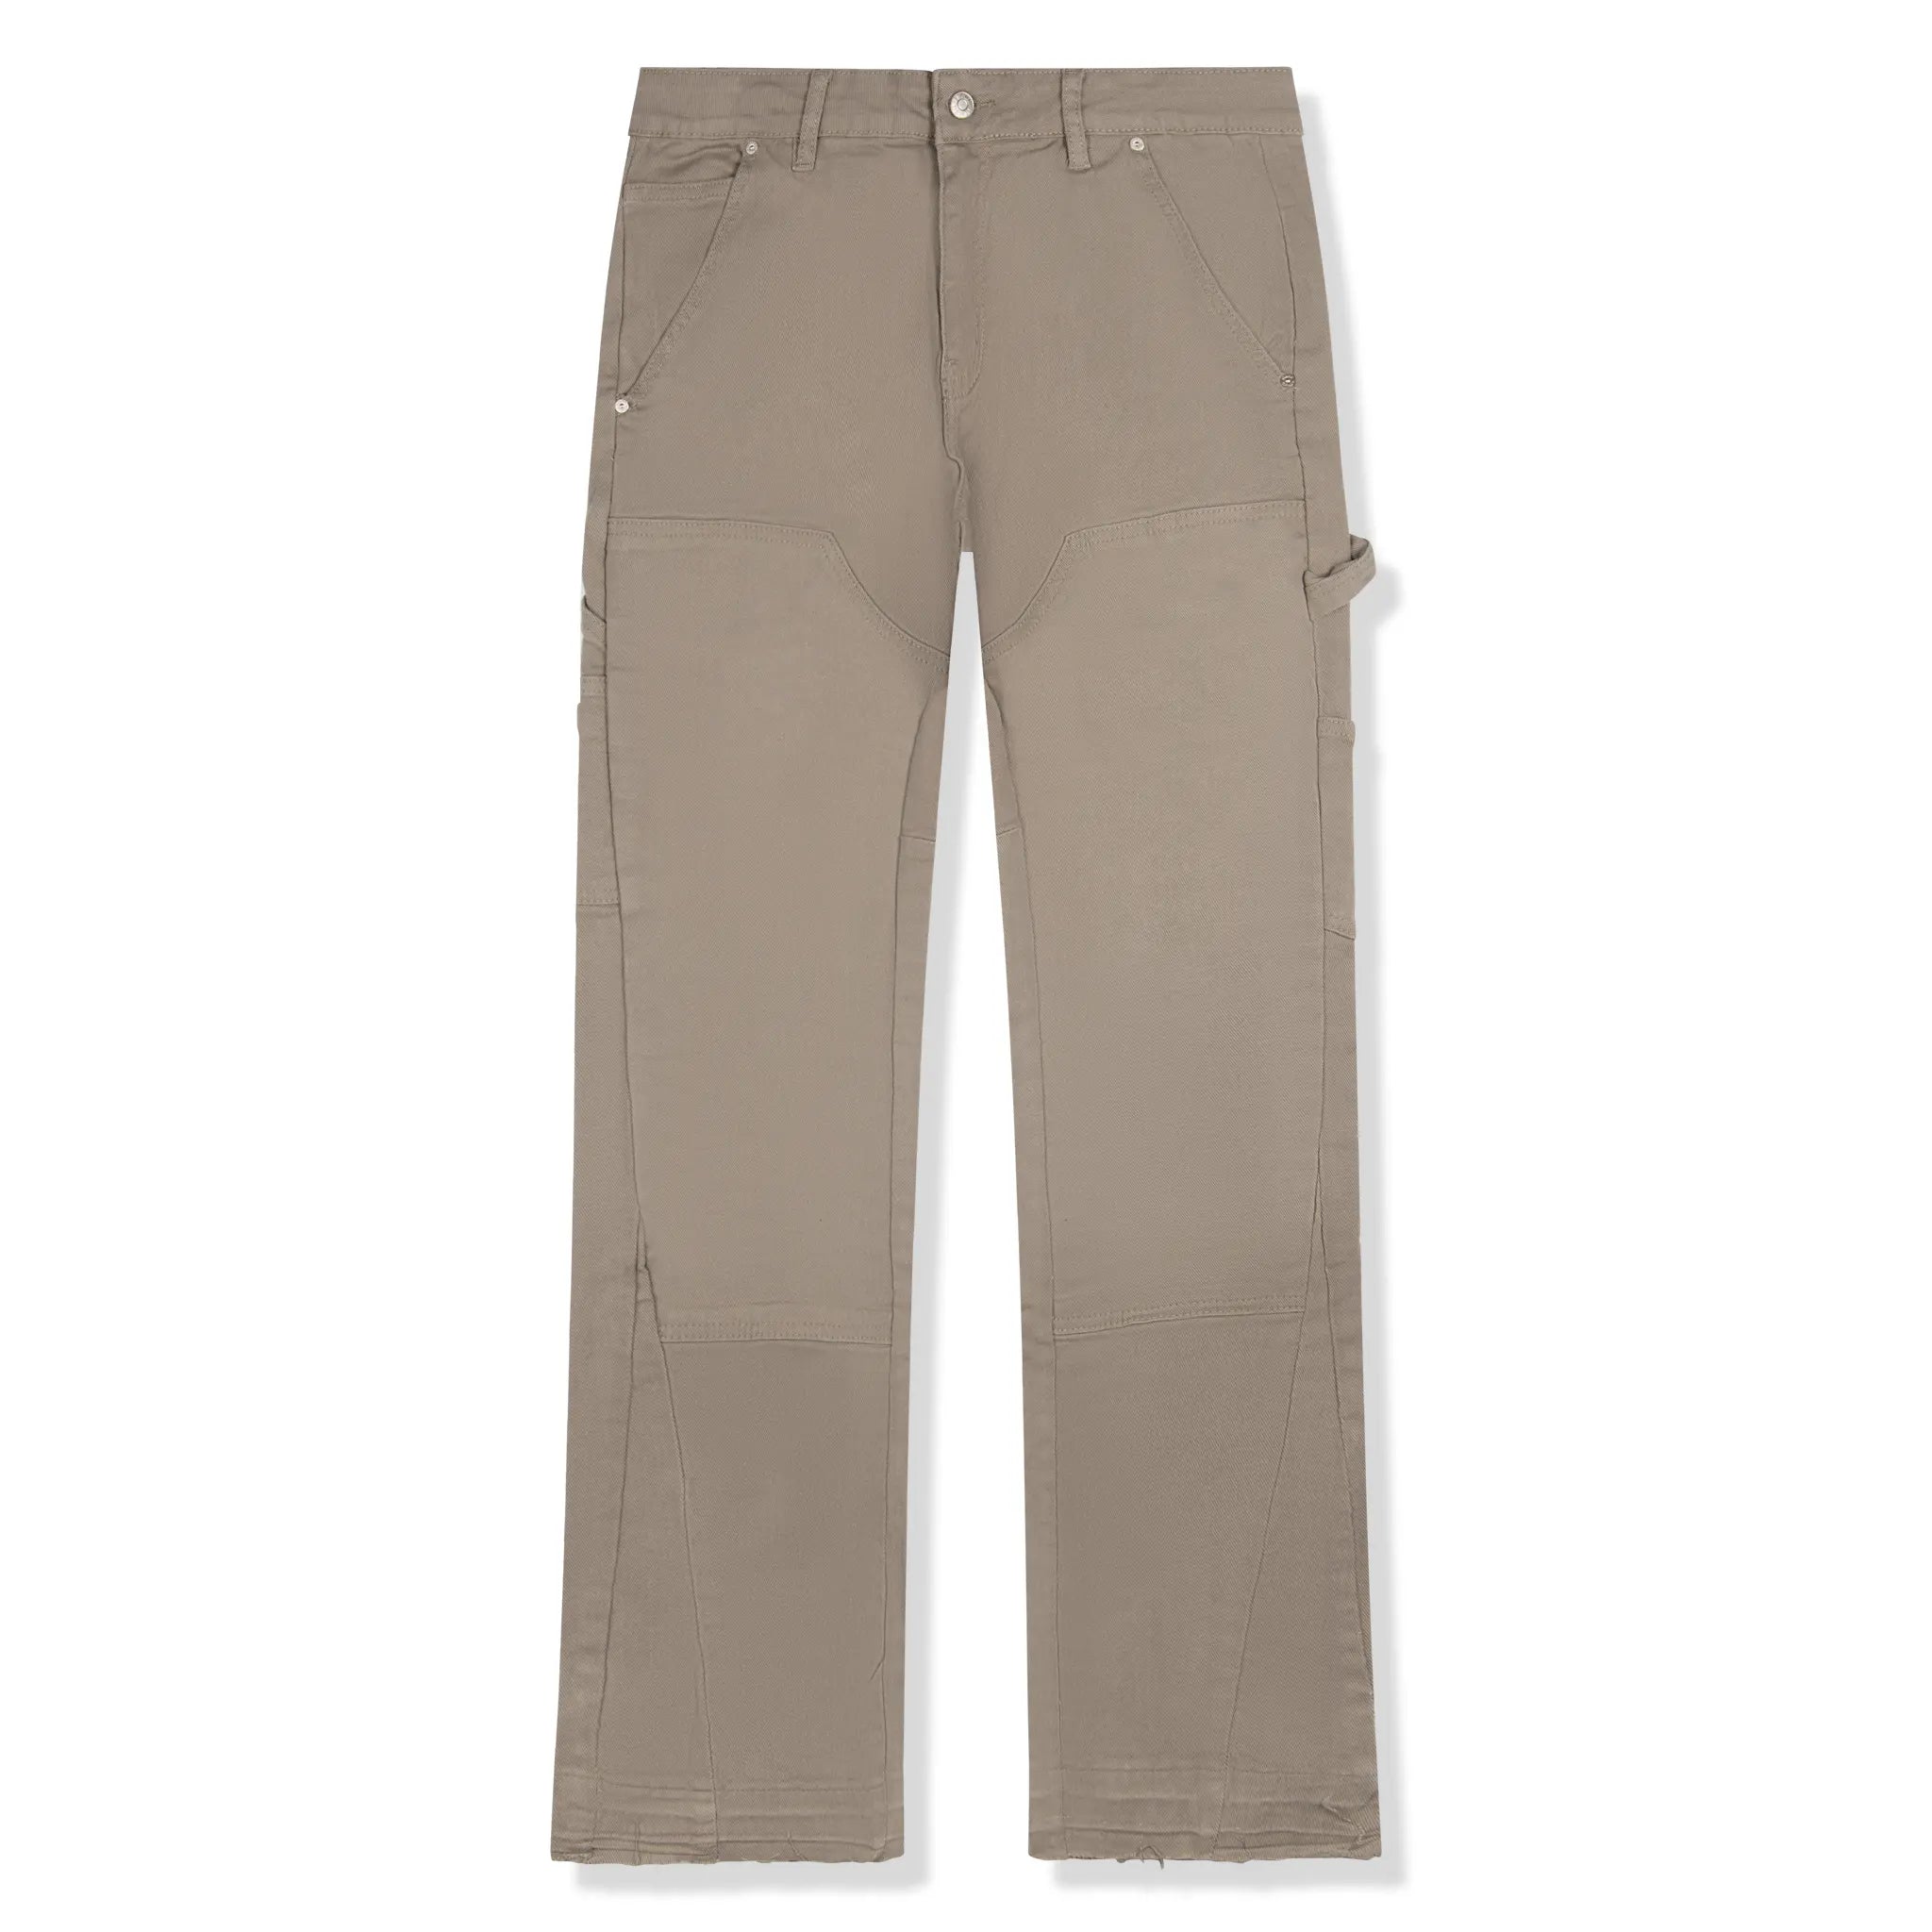 Front view of SIARR Rio Jeans Beige